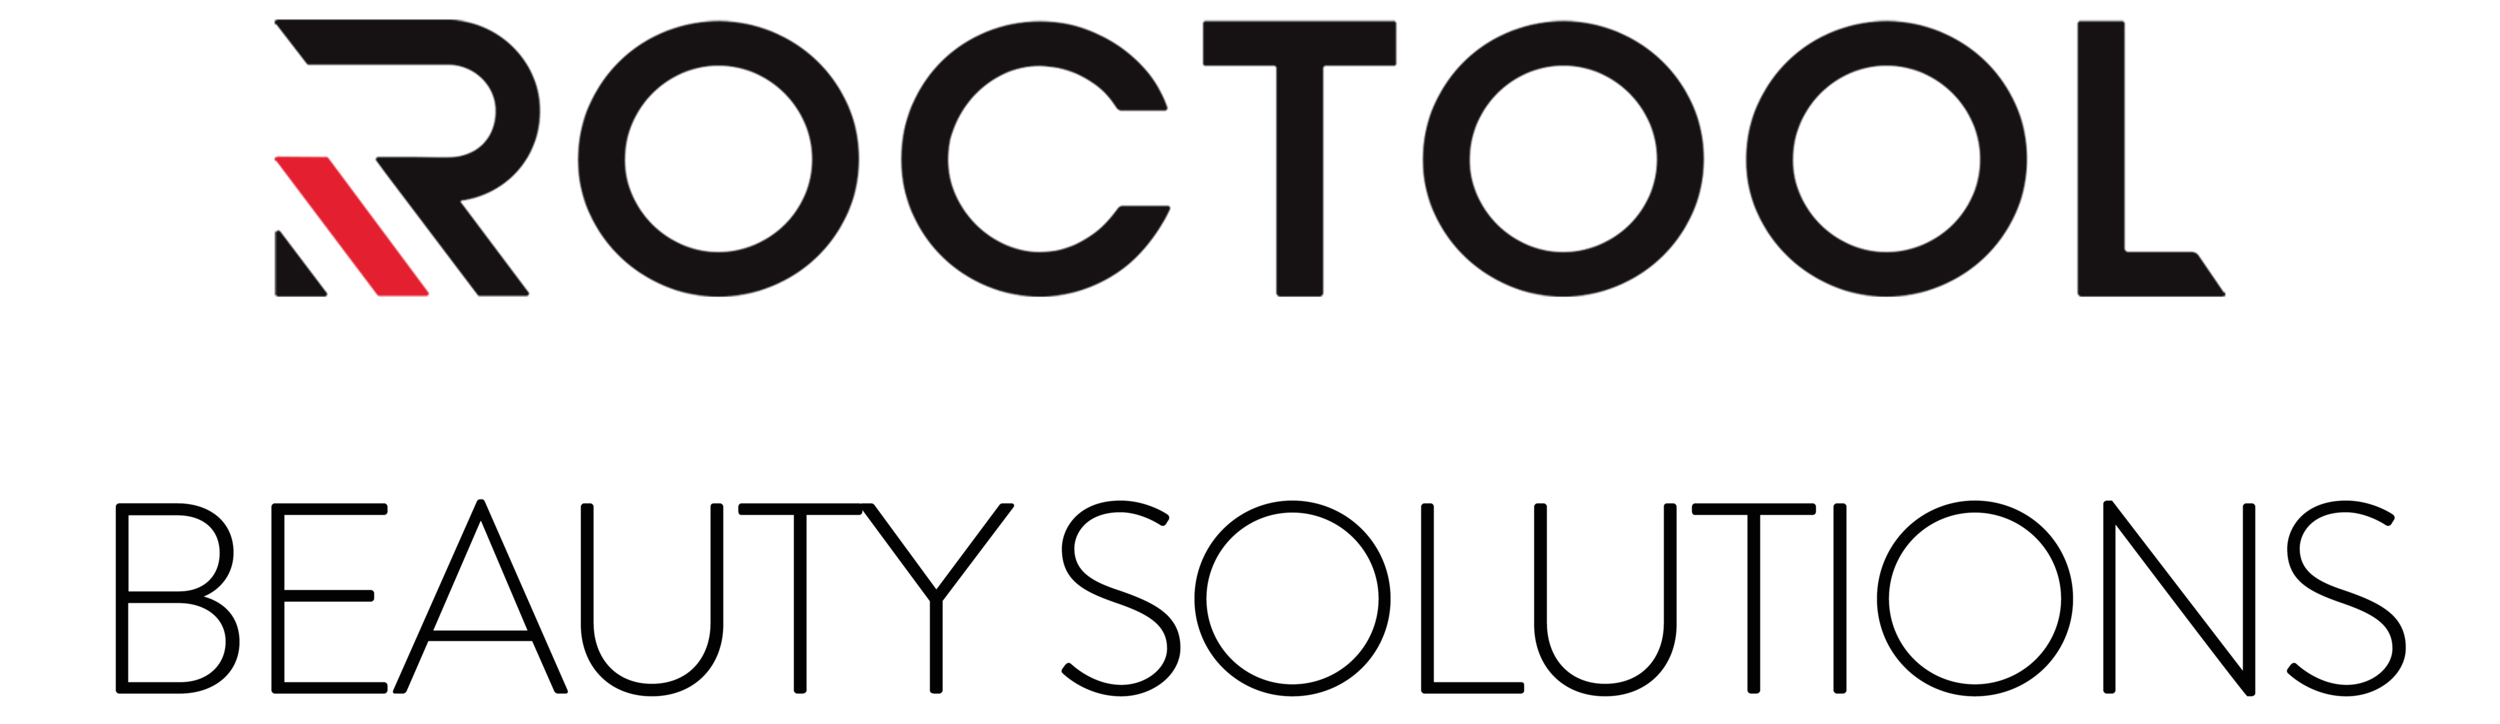 Roctool Beauty Solutions